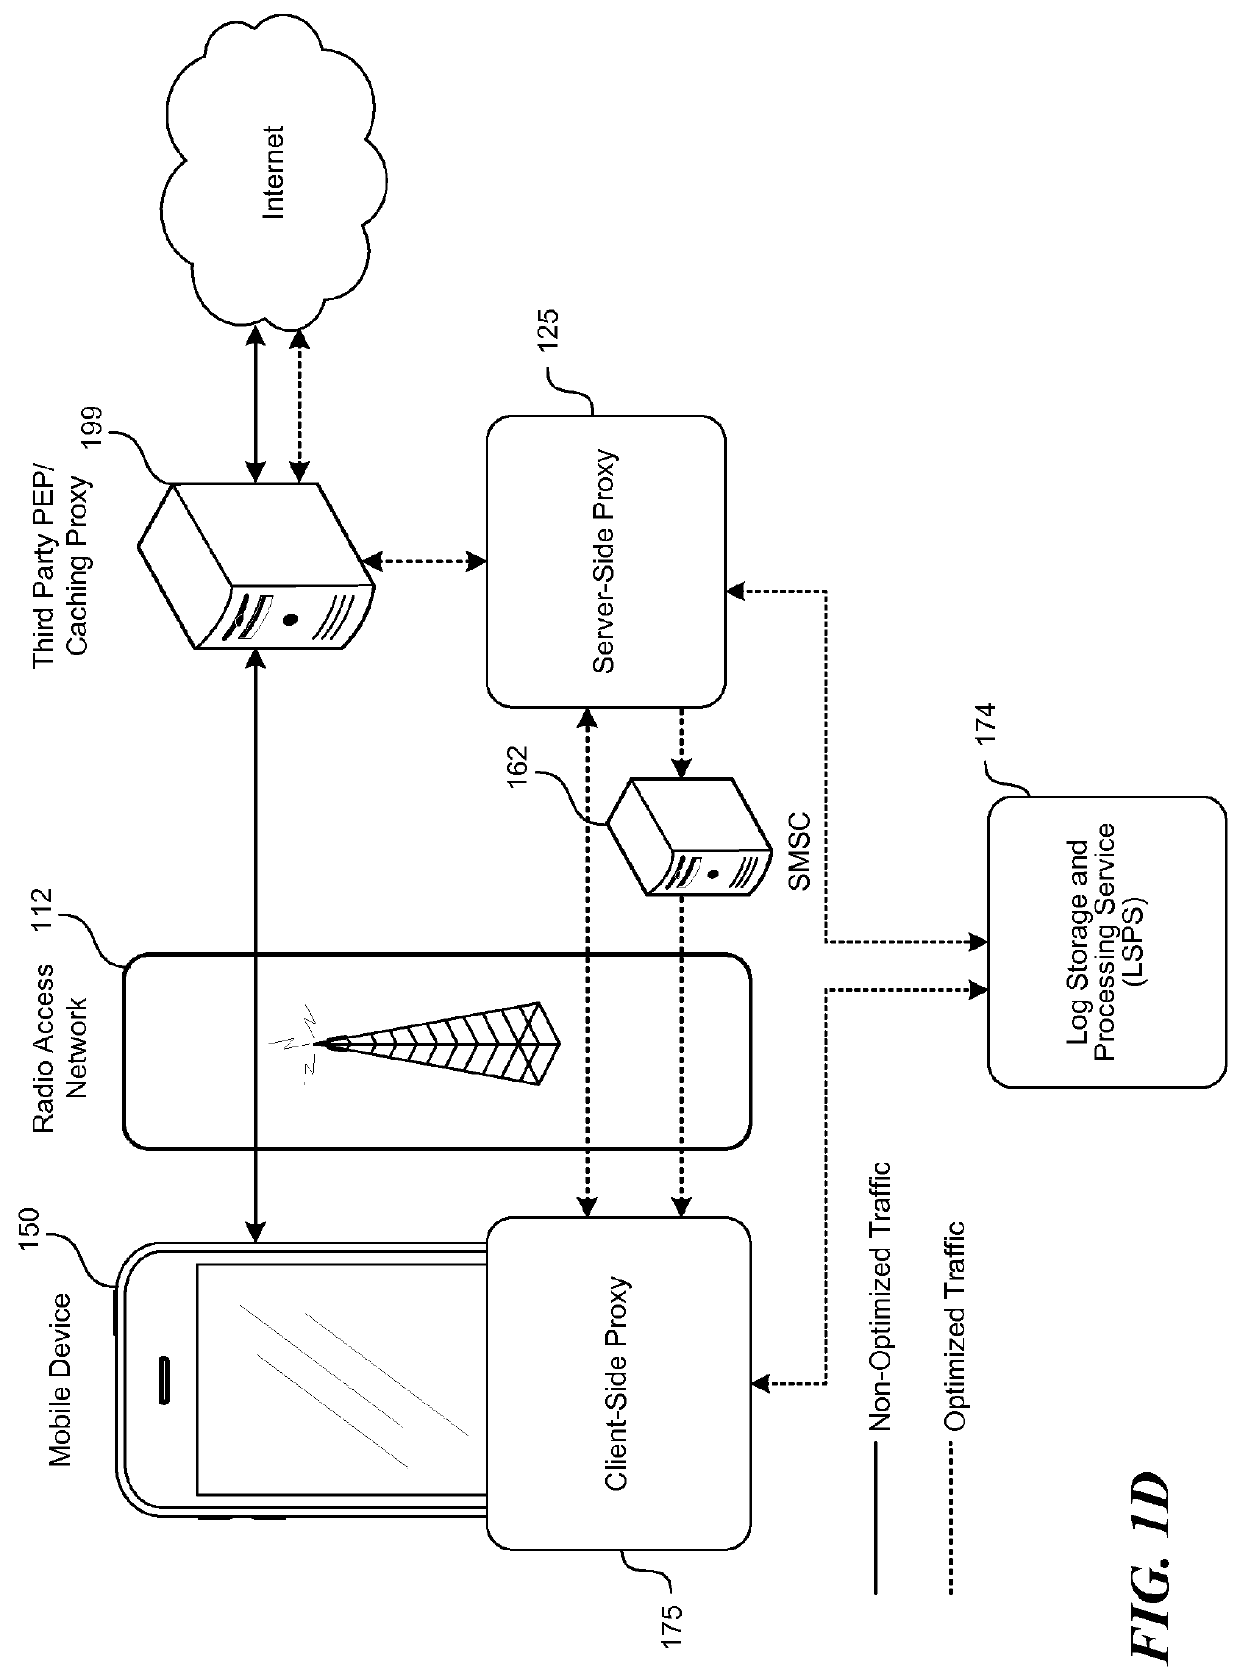 Mobile device equipped with mobile network congestion recognition to make intelligent decisions regarding connecting to an operator network for optimize user experience